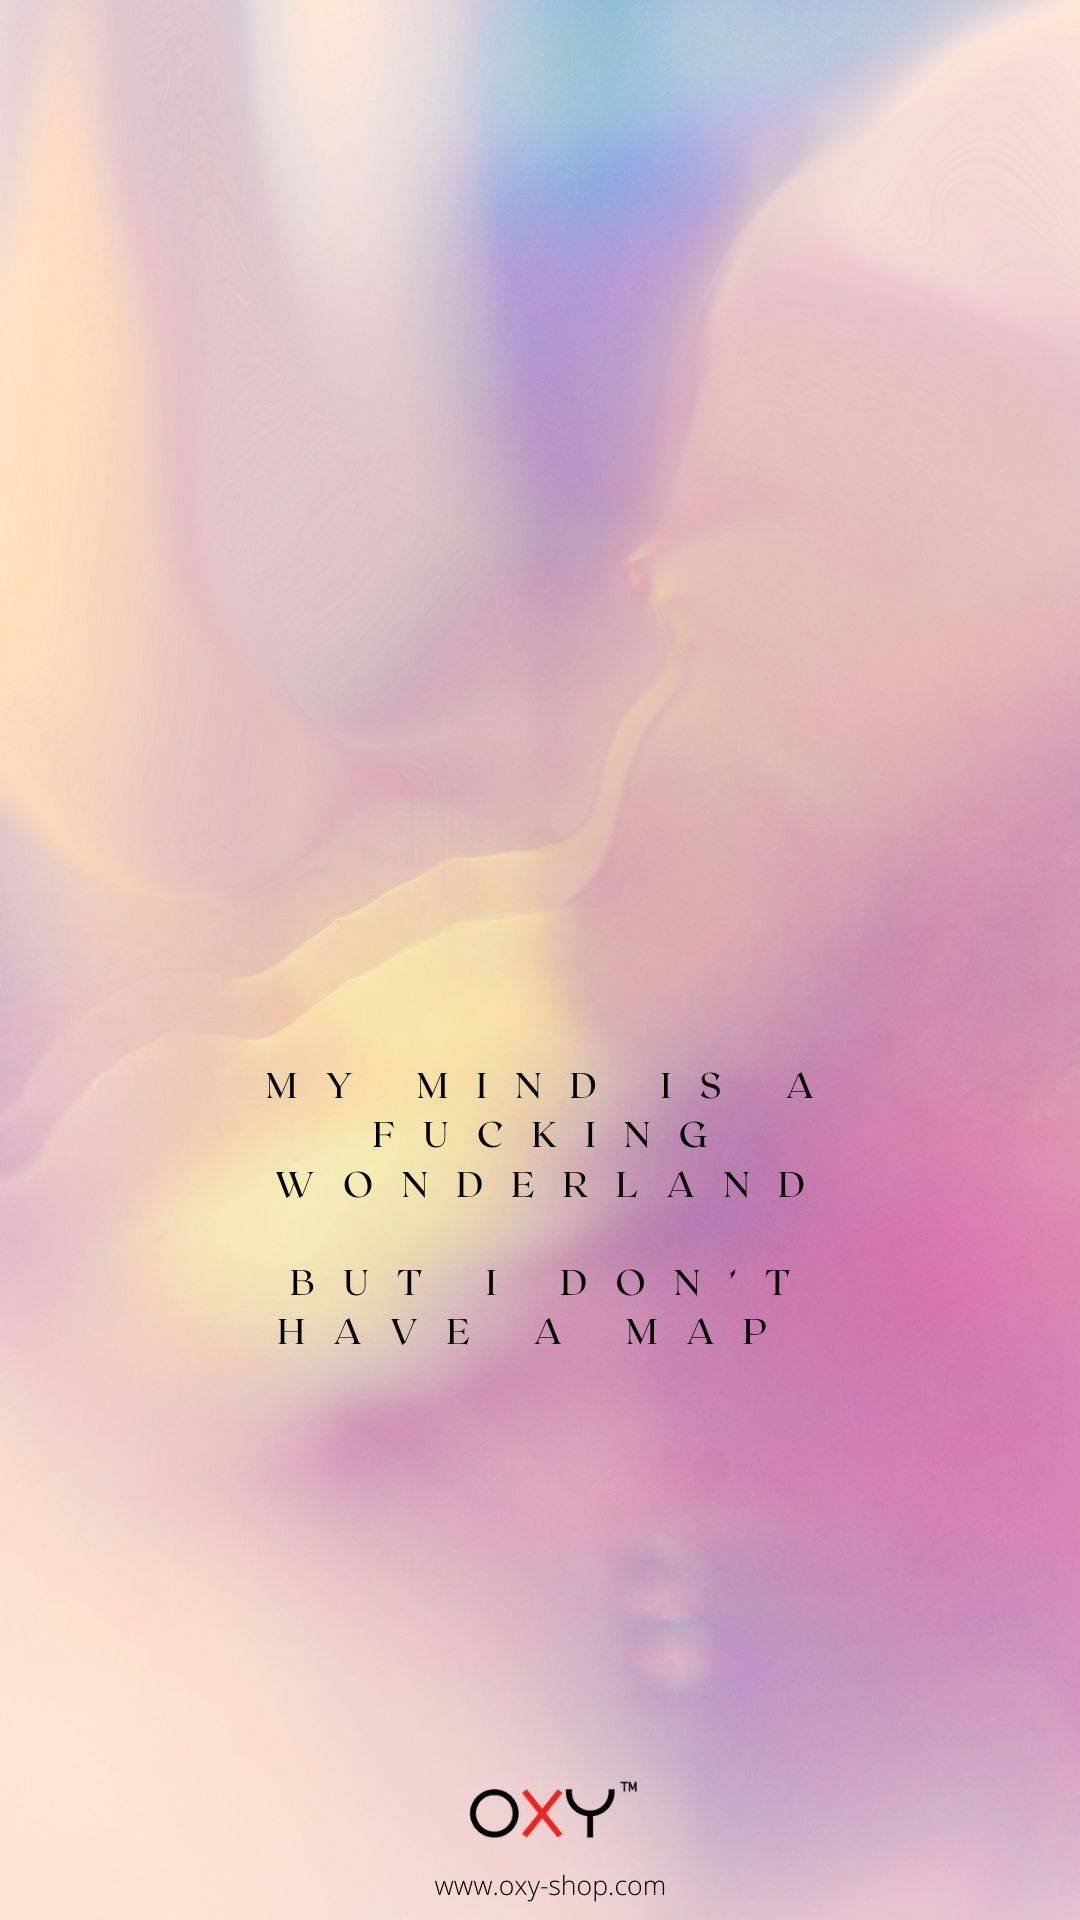 My mind is a fucking wonderland but I do not have a map. - BDSM wallpaper